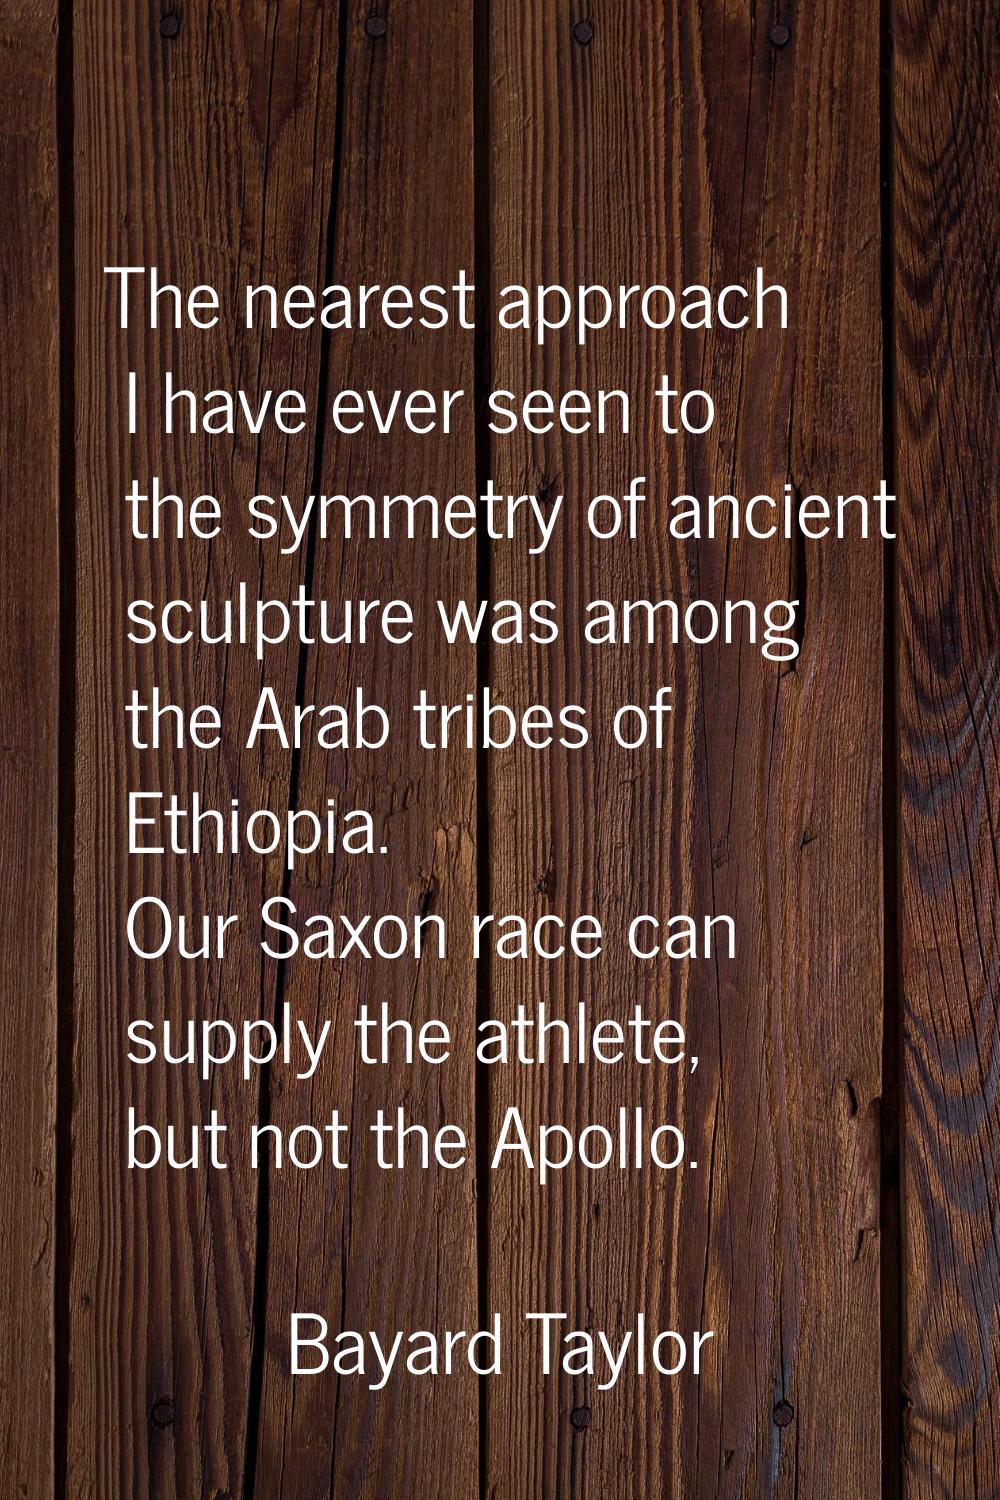 The nearest approach I have ever seen to the symmetry of ancient sculpture was among the Arab tribe